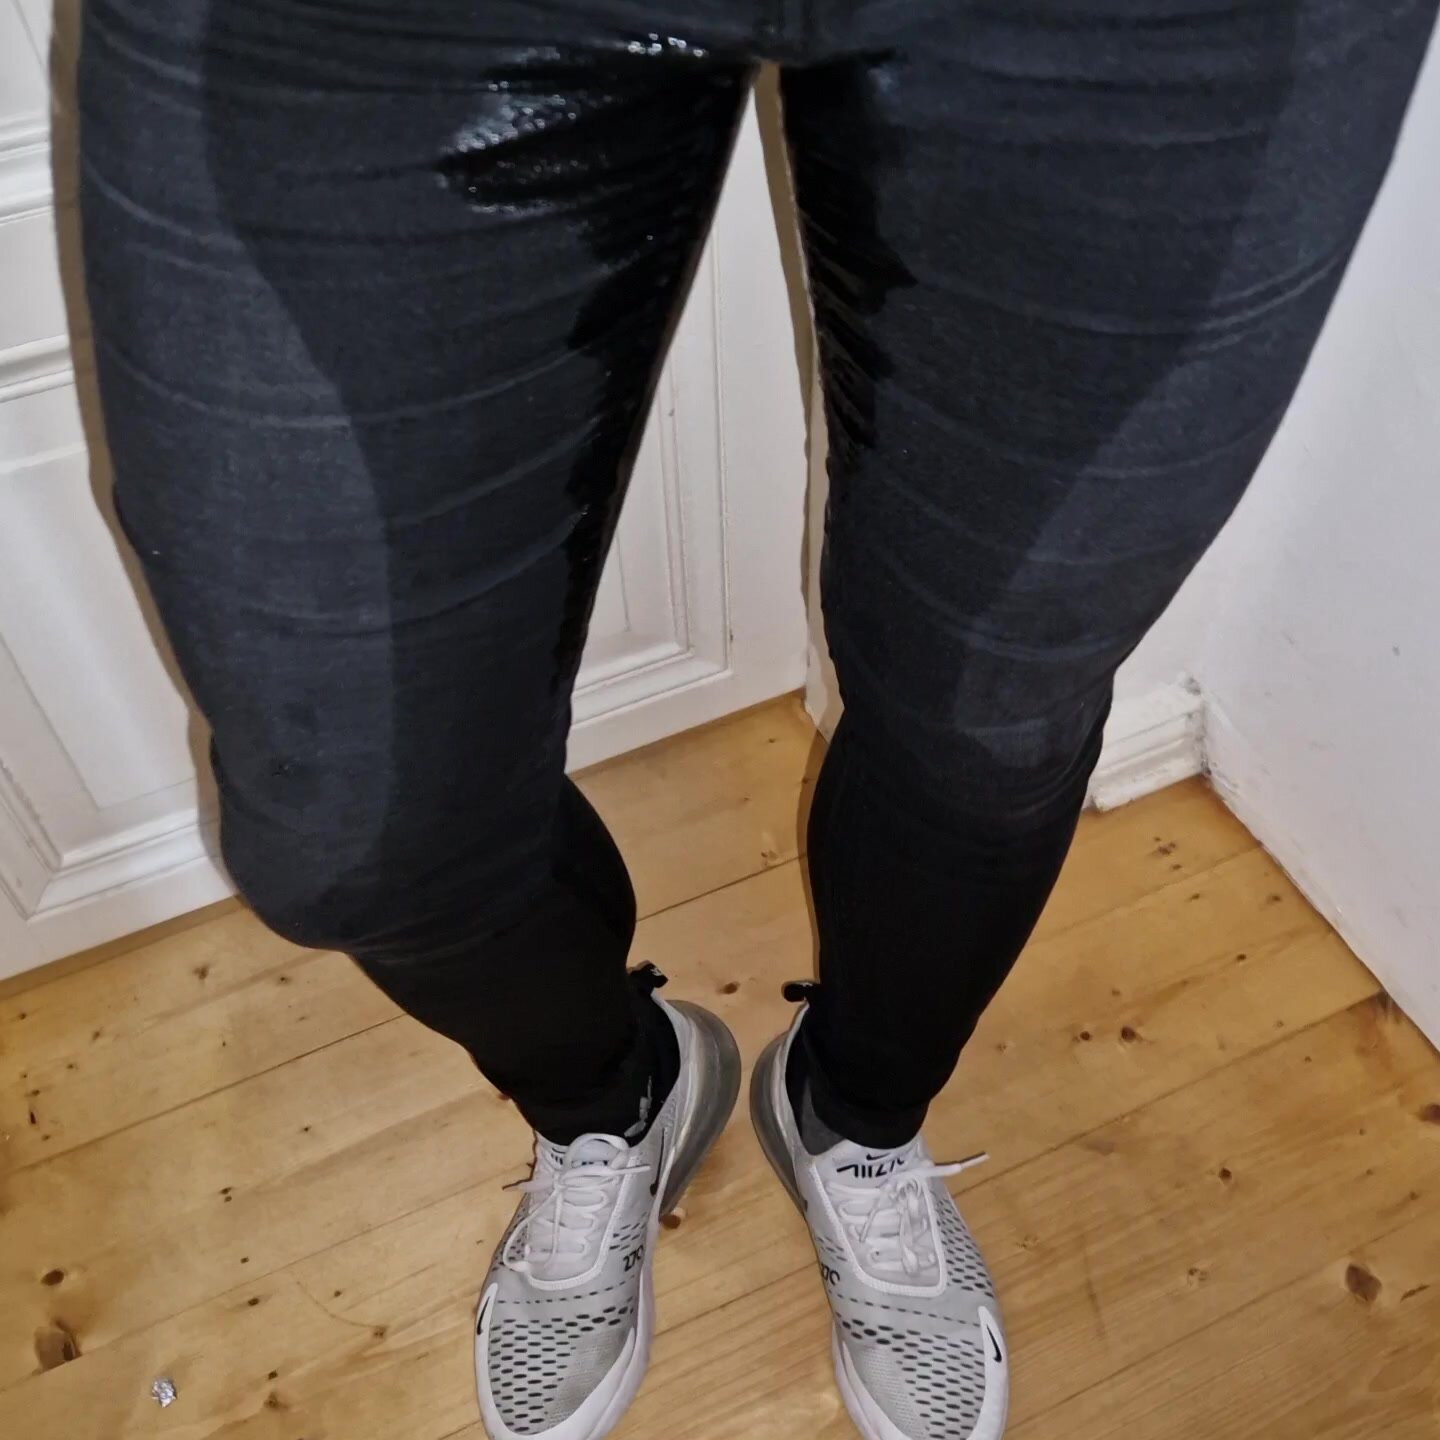 Pee my Jeans again rewetting